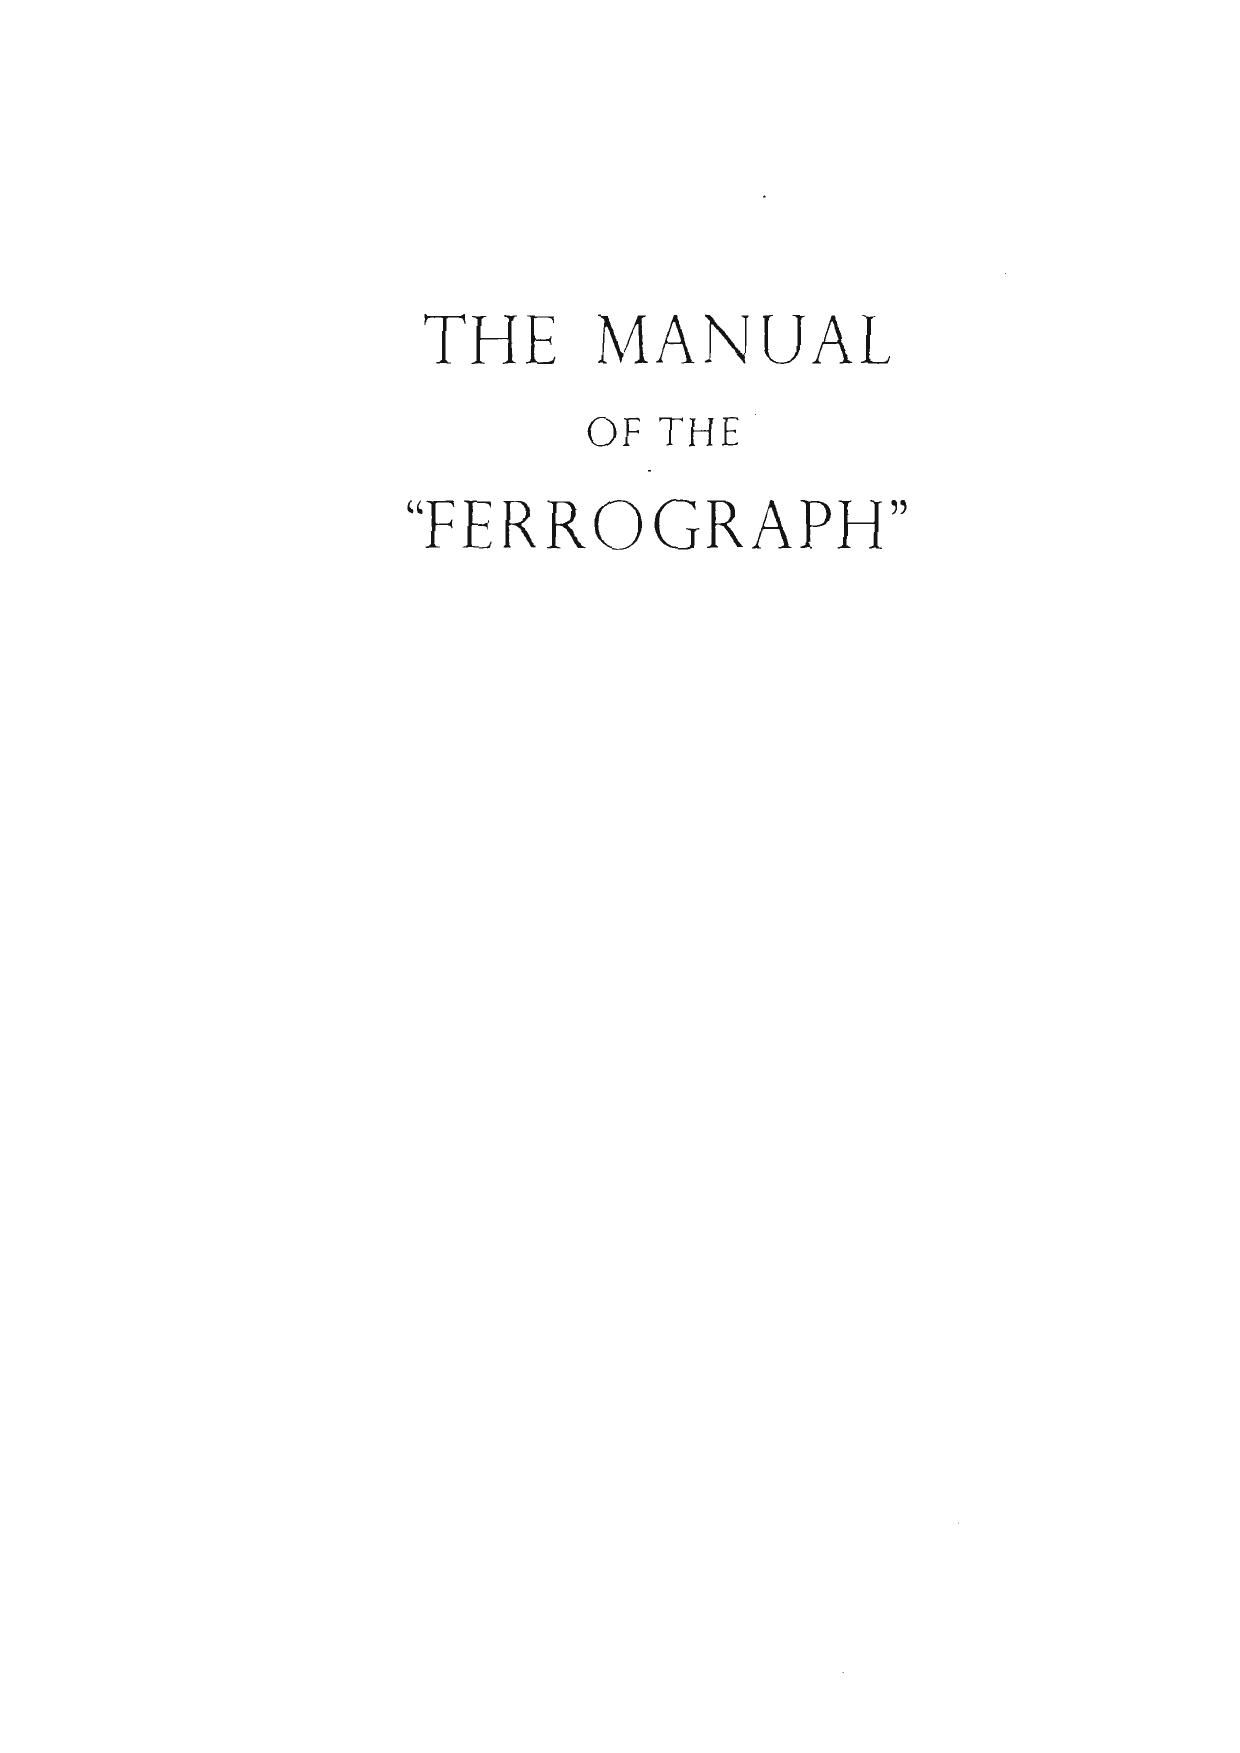 Ferrograph 4 S Owners Manual